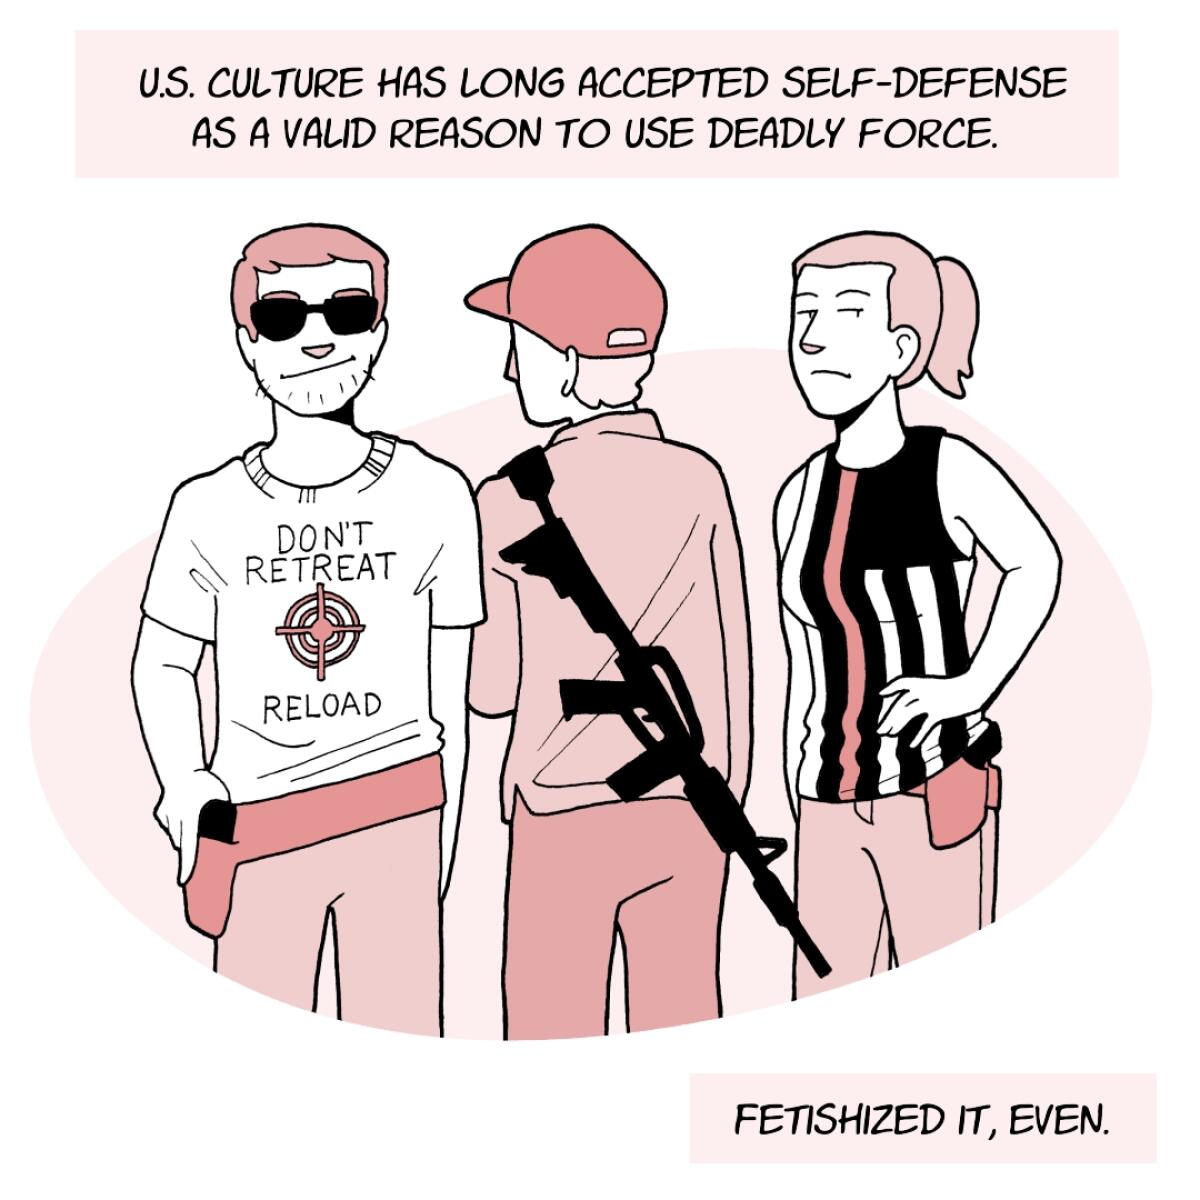 U.S. culture has long accepted self-defense as a valid reason to use deadly force. Fetishized it, even.